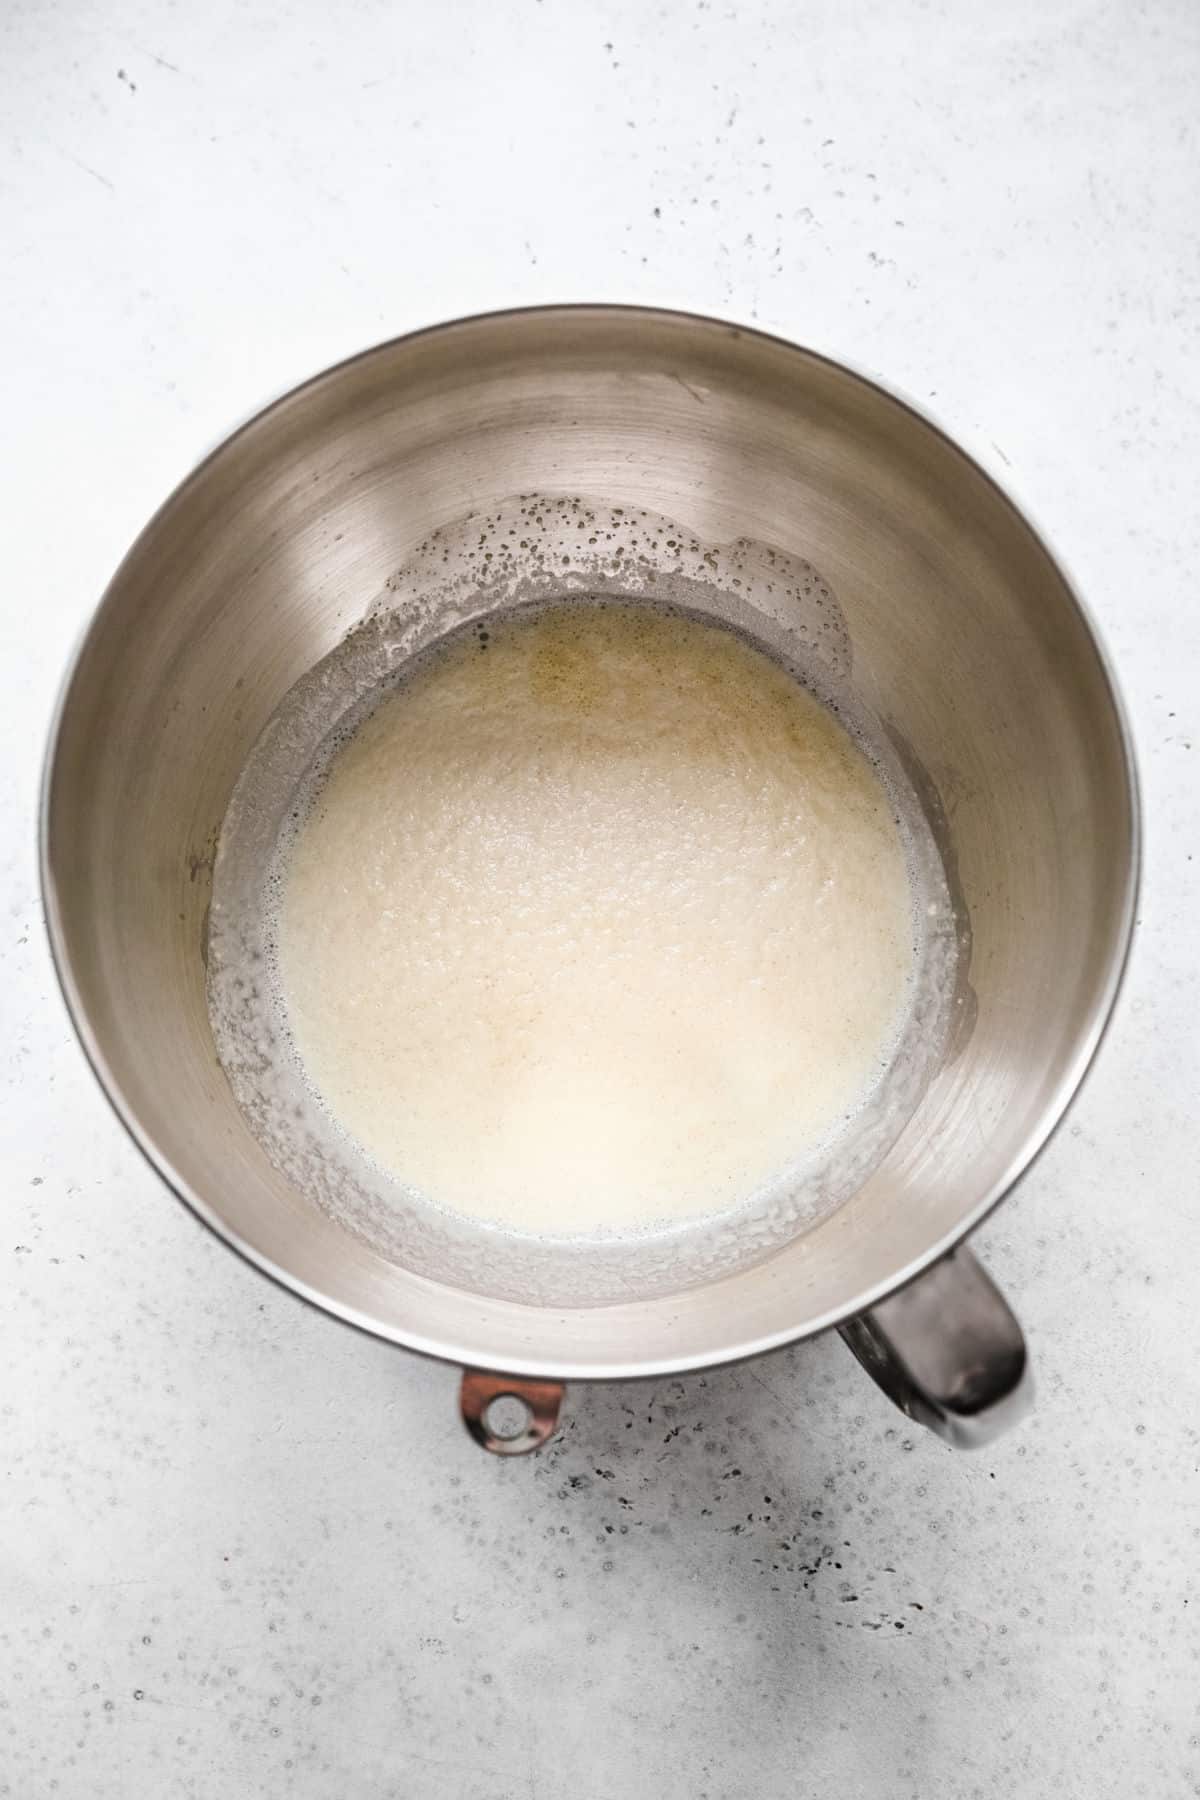 Foamy yeast mixture in a silver mixing bowl. 